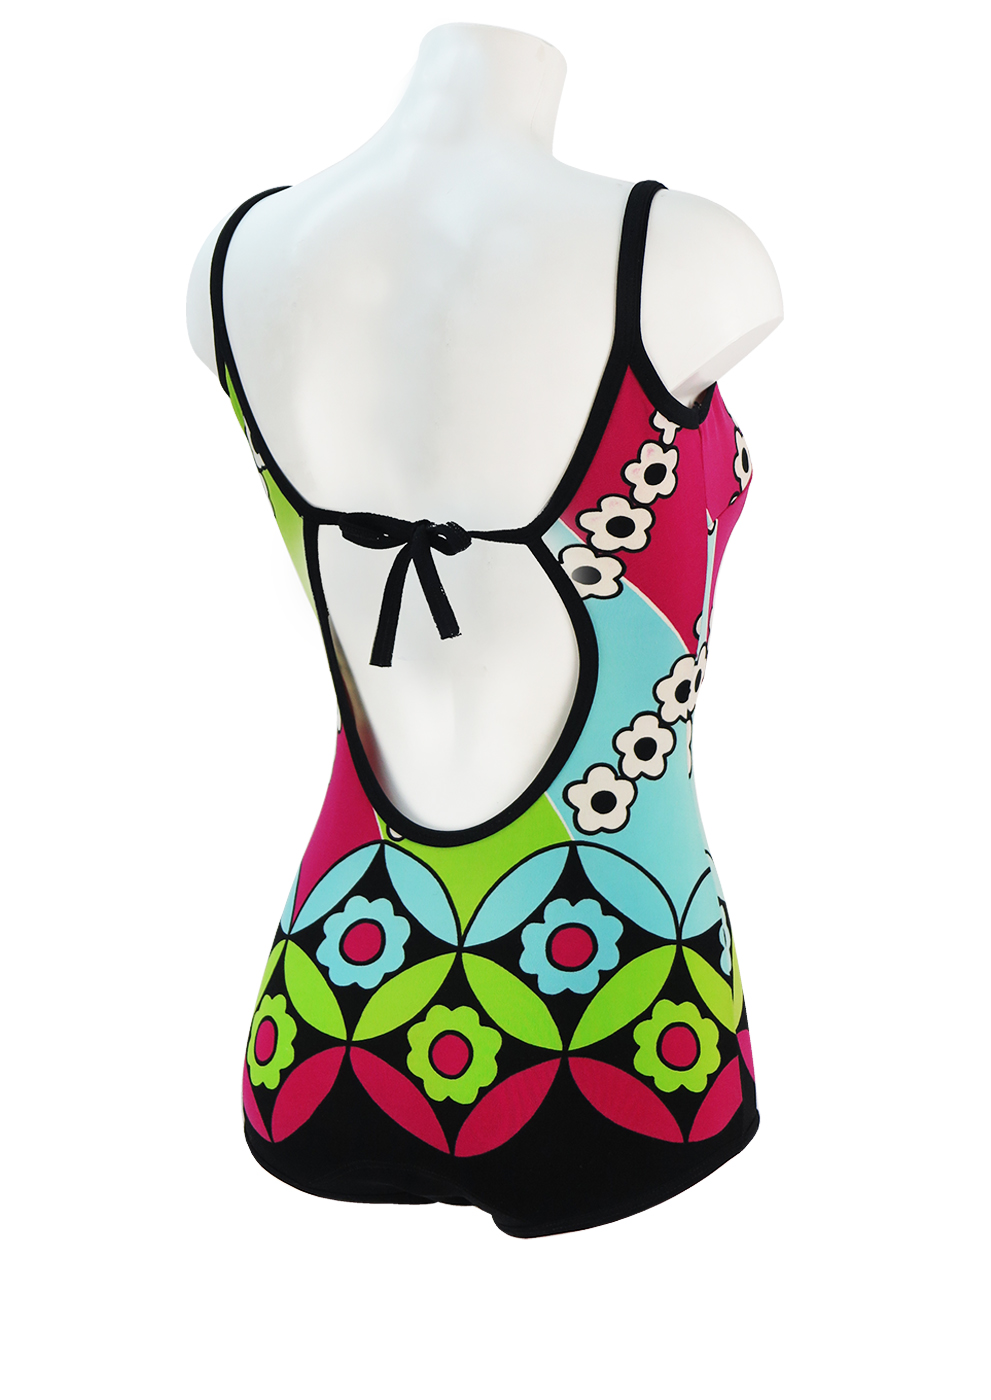 Vintage 70's Swimsuit with Green, Turquoise & Purple Floral Pattern ...